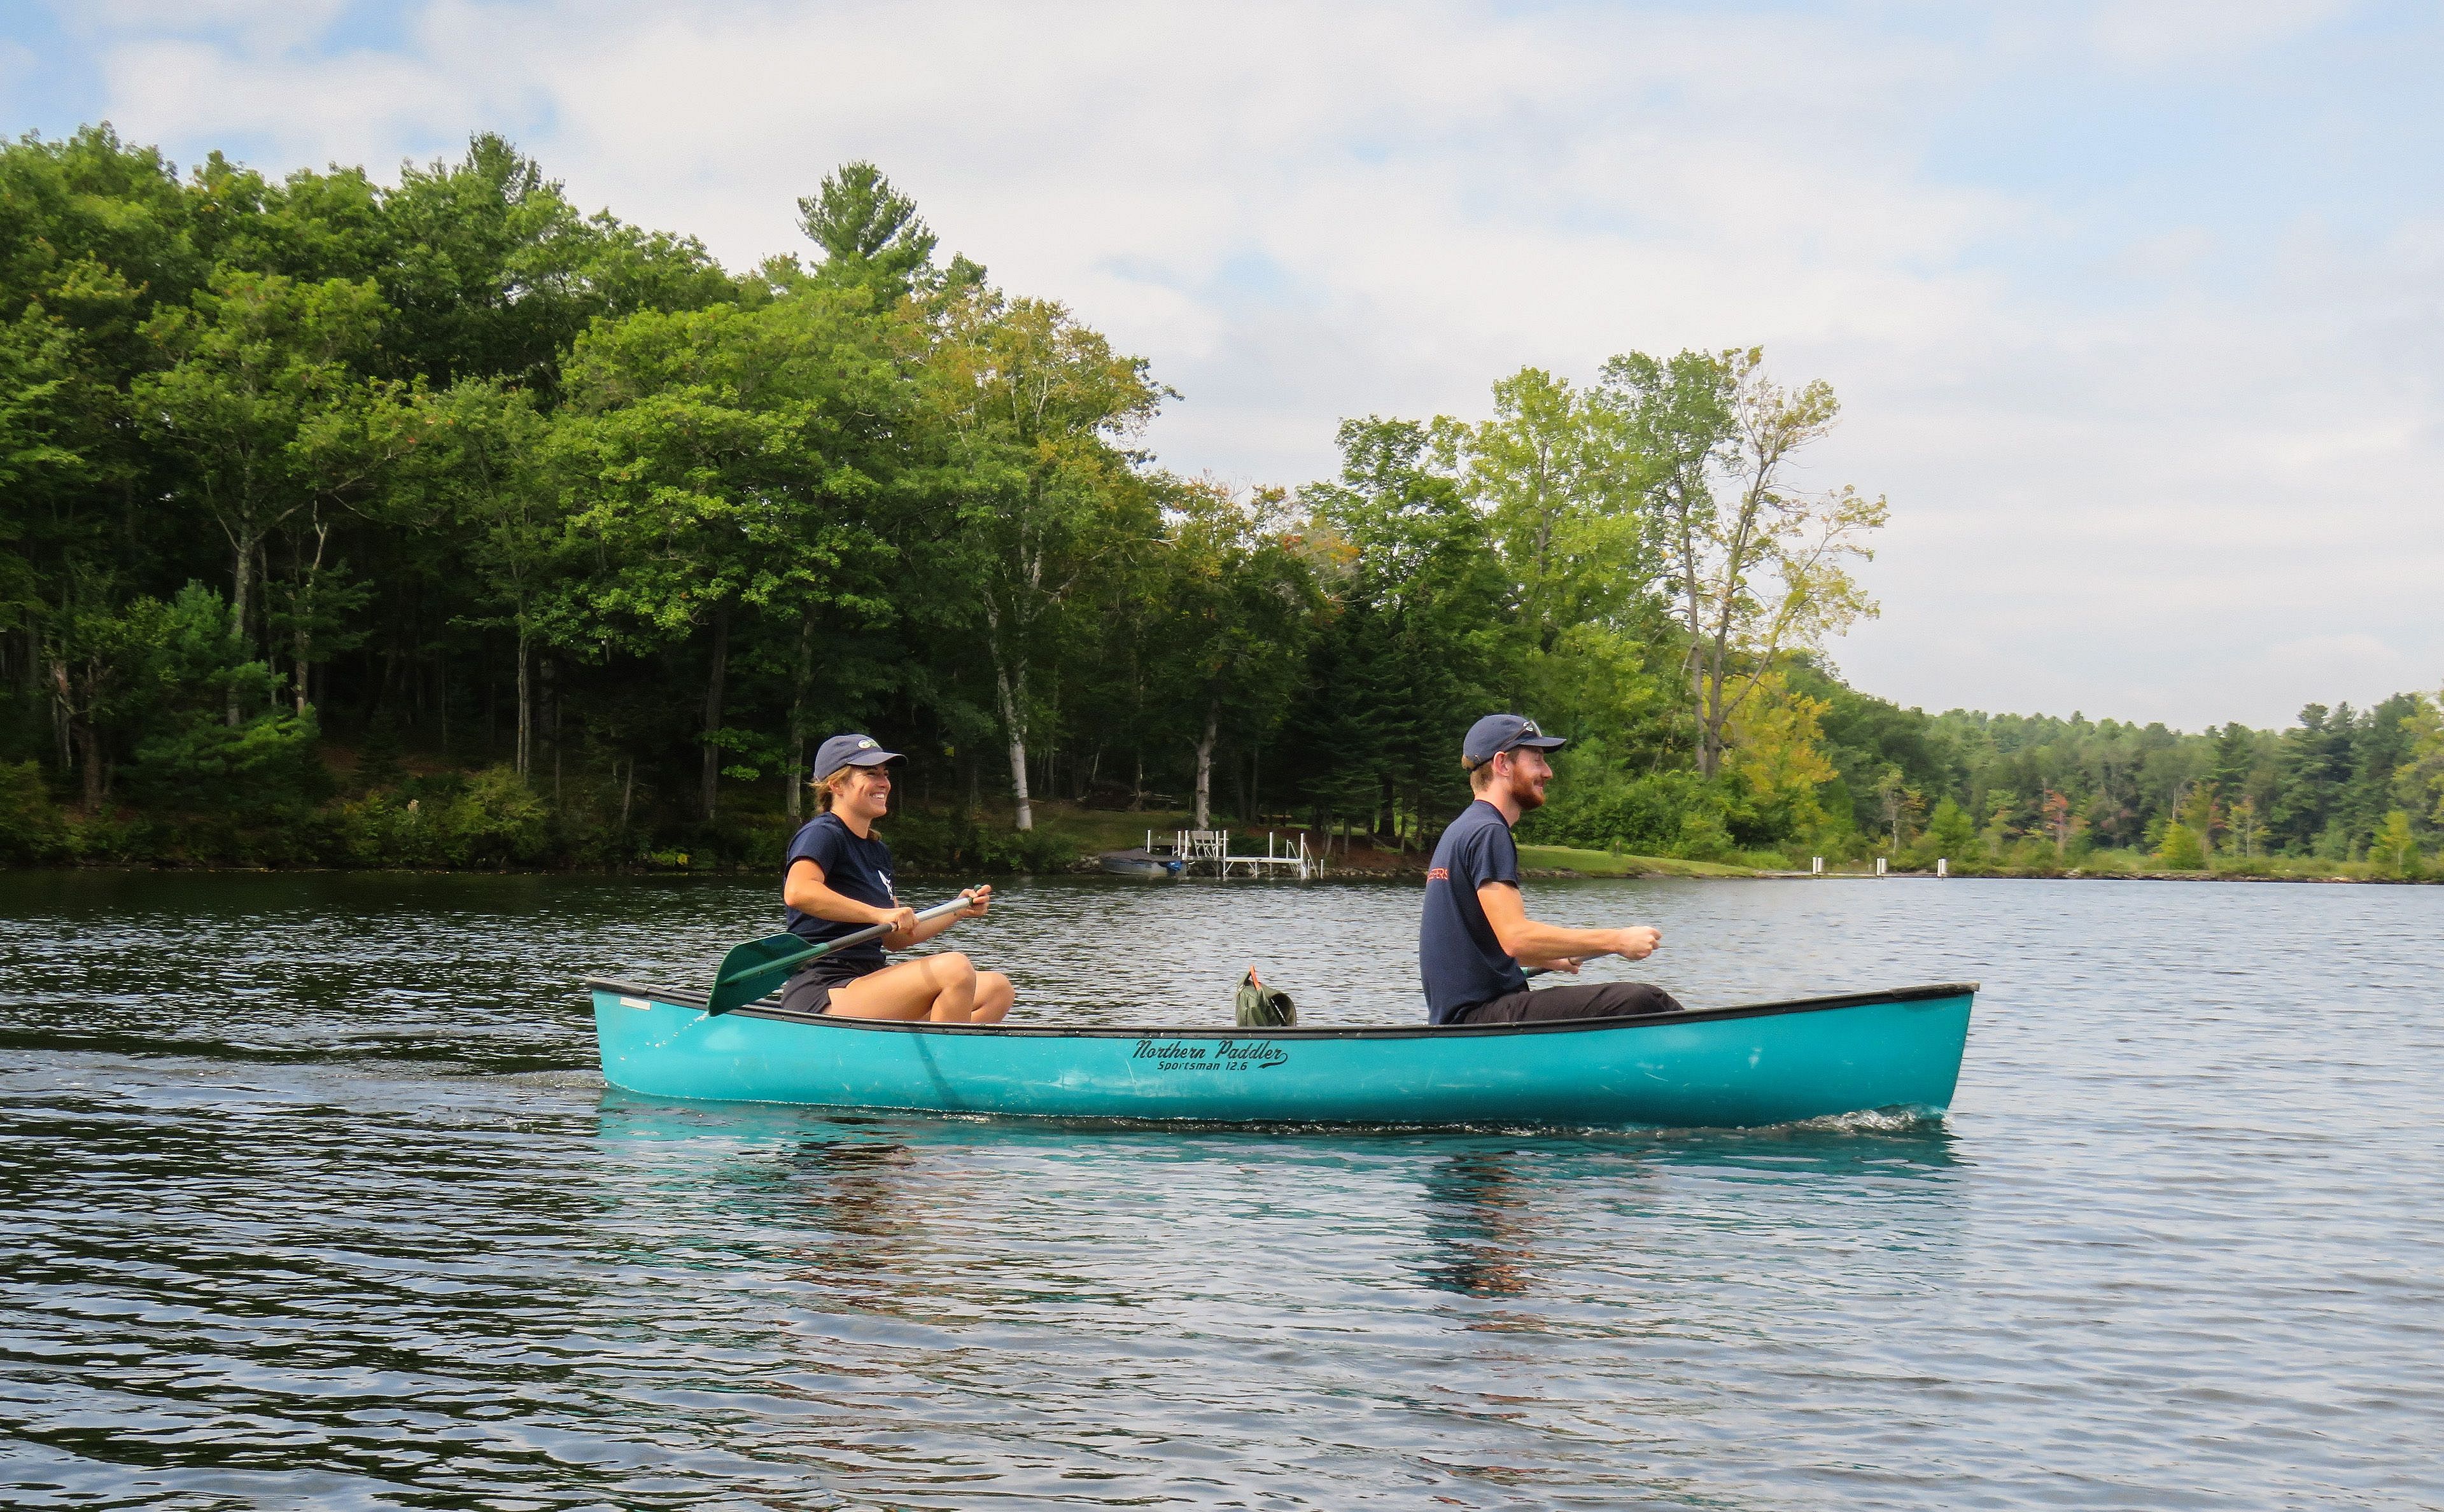 Guided Paddle on Lake Ashmere